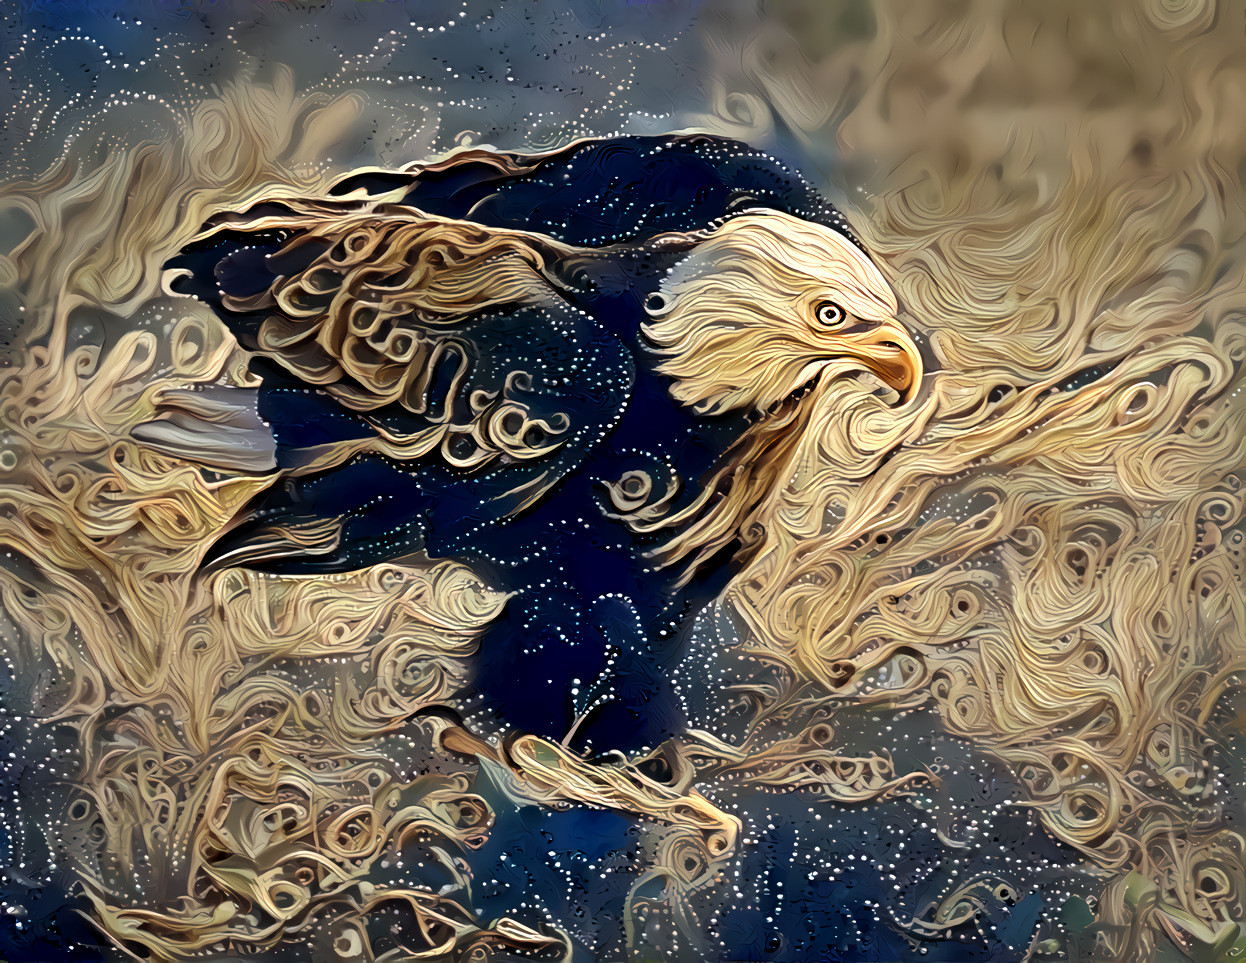 RESPECT! The bald eagle was chosen June 20, 1782 as the emblem of the United States of America, because of its long life, great strength & majestic looks... A culture of hope, wisdom, courage, leadership & vision. The eagle most of all represents freedom.